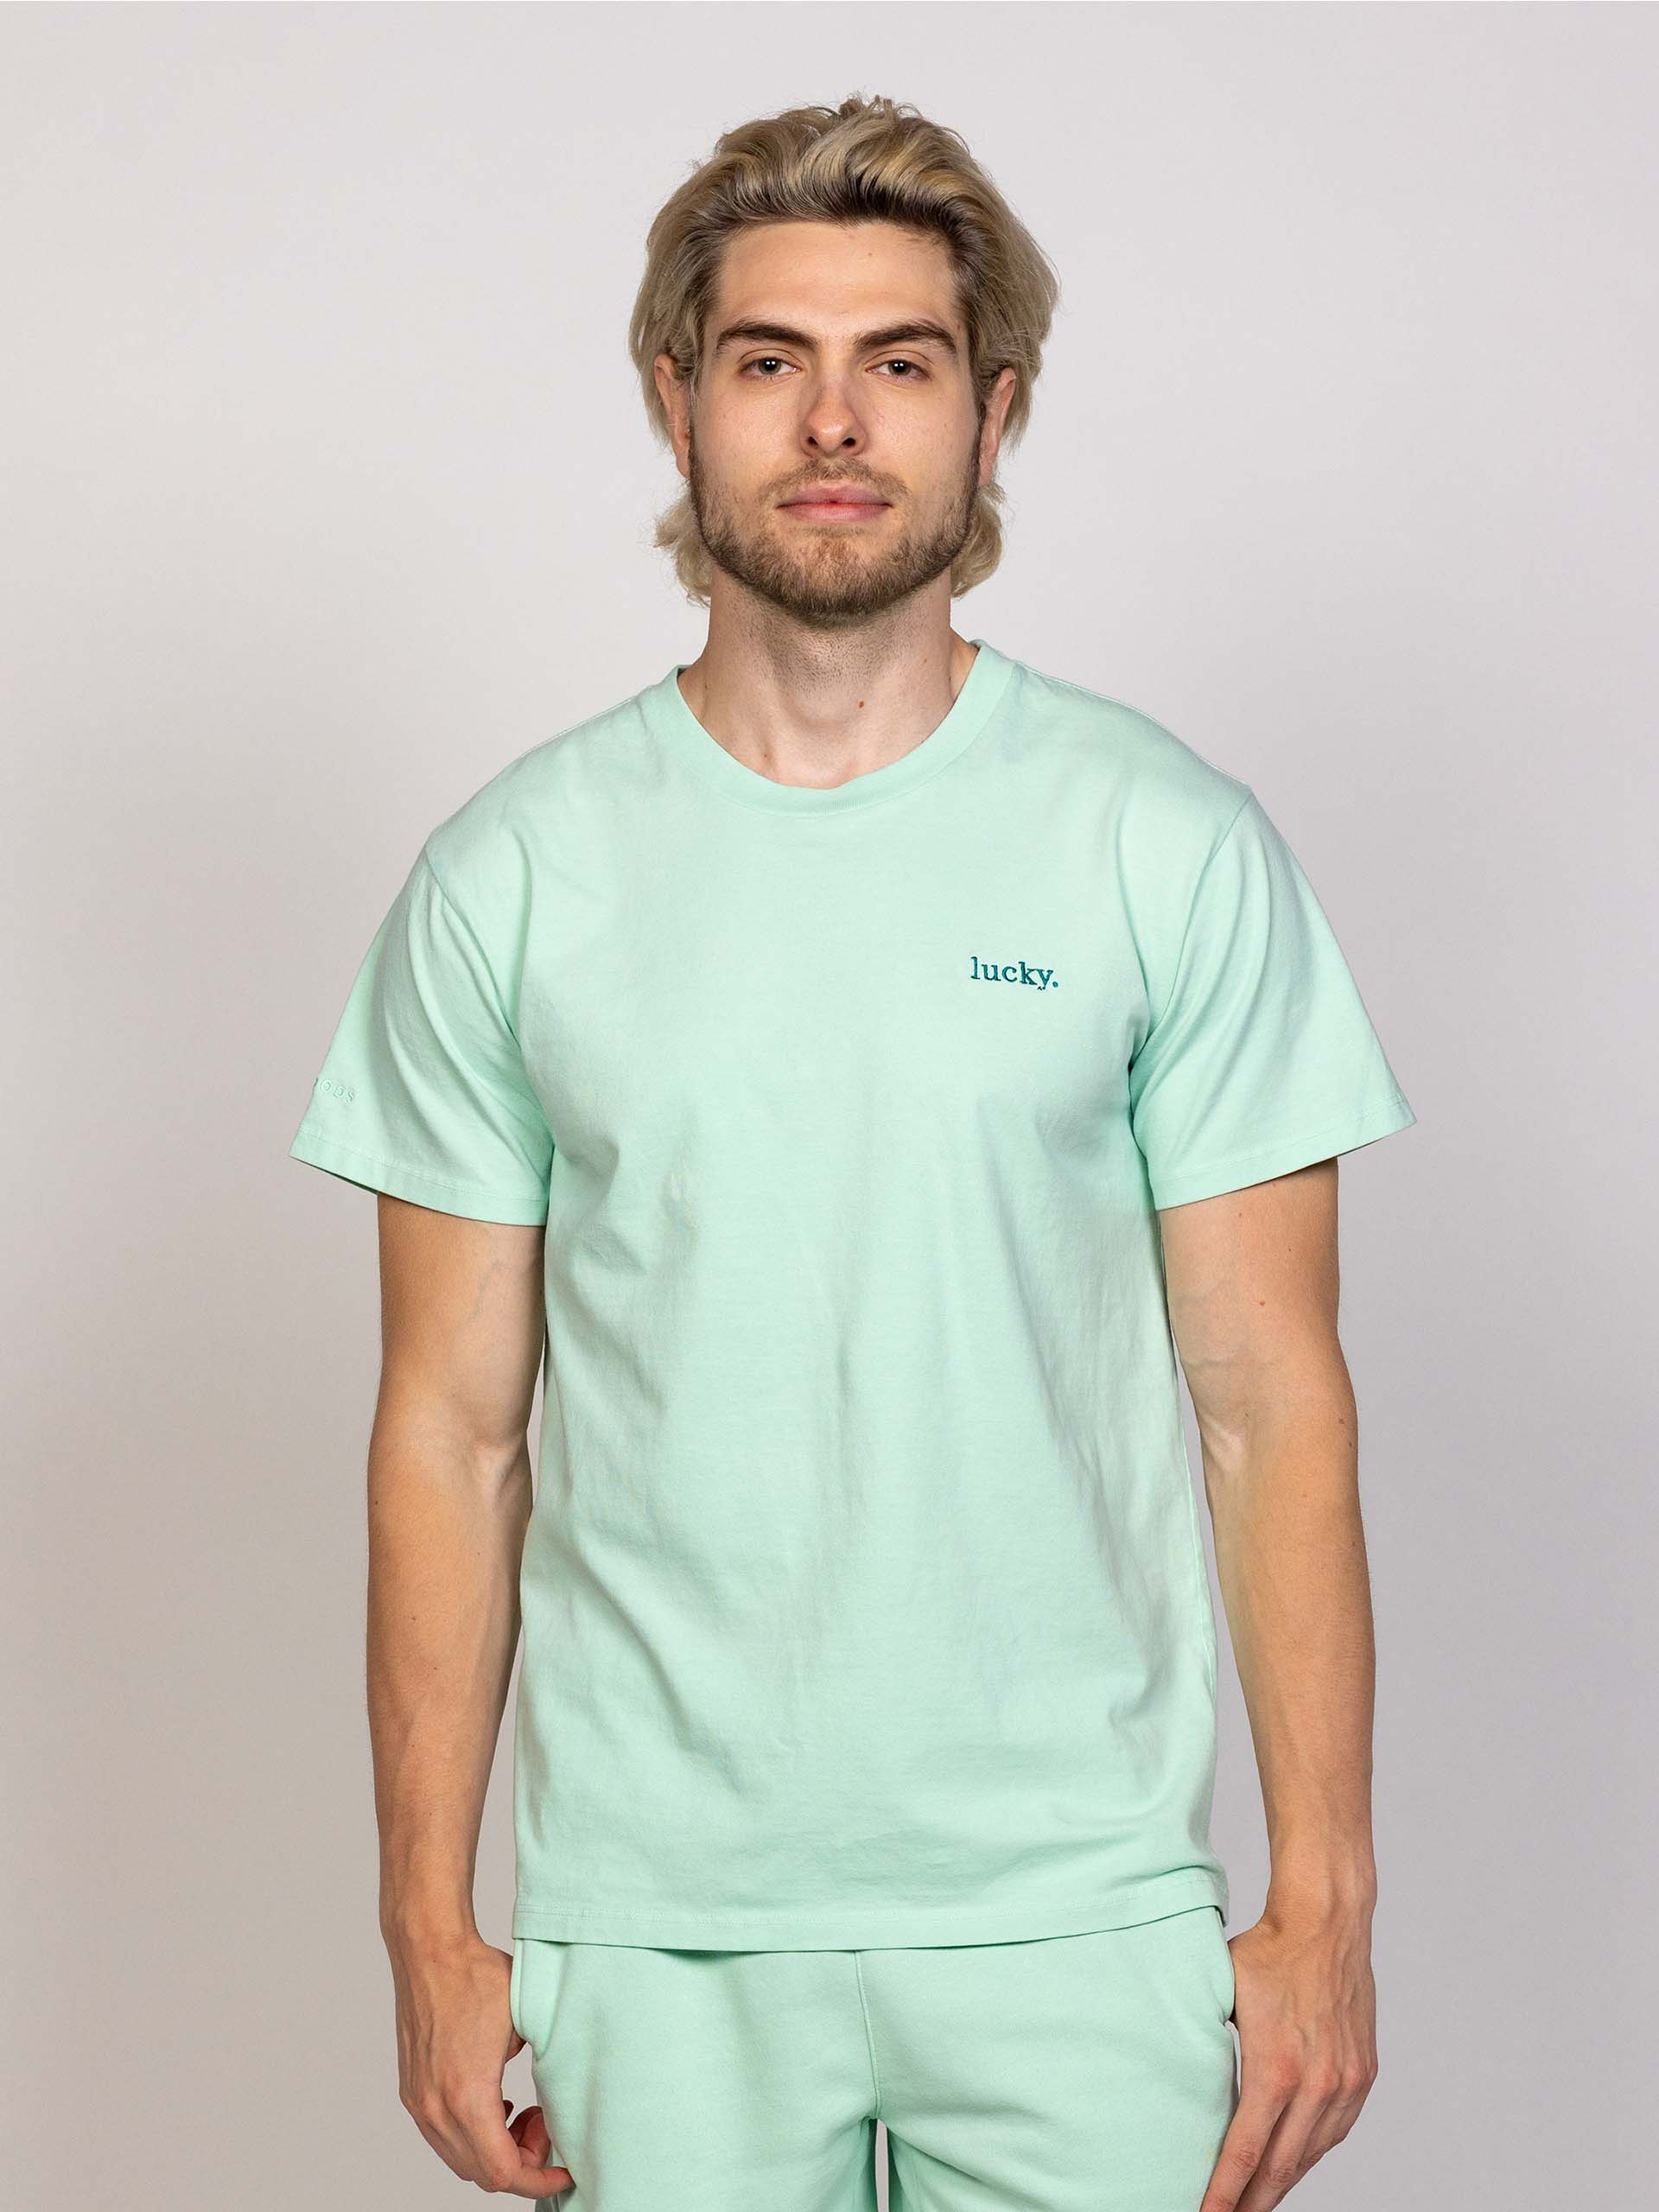 lucky shirt – Moods Clothing